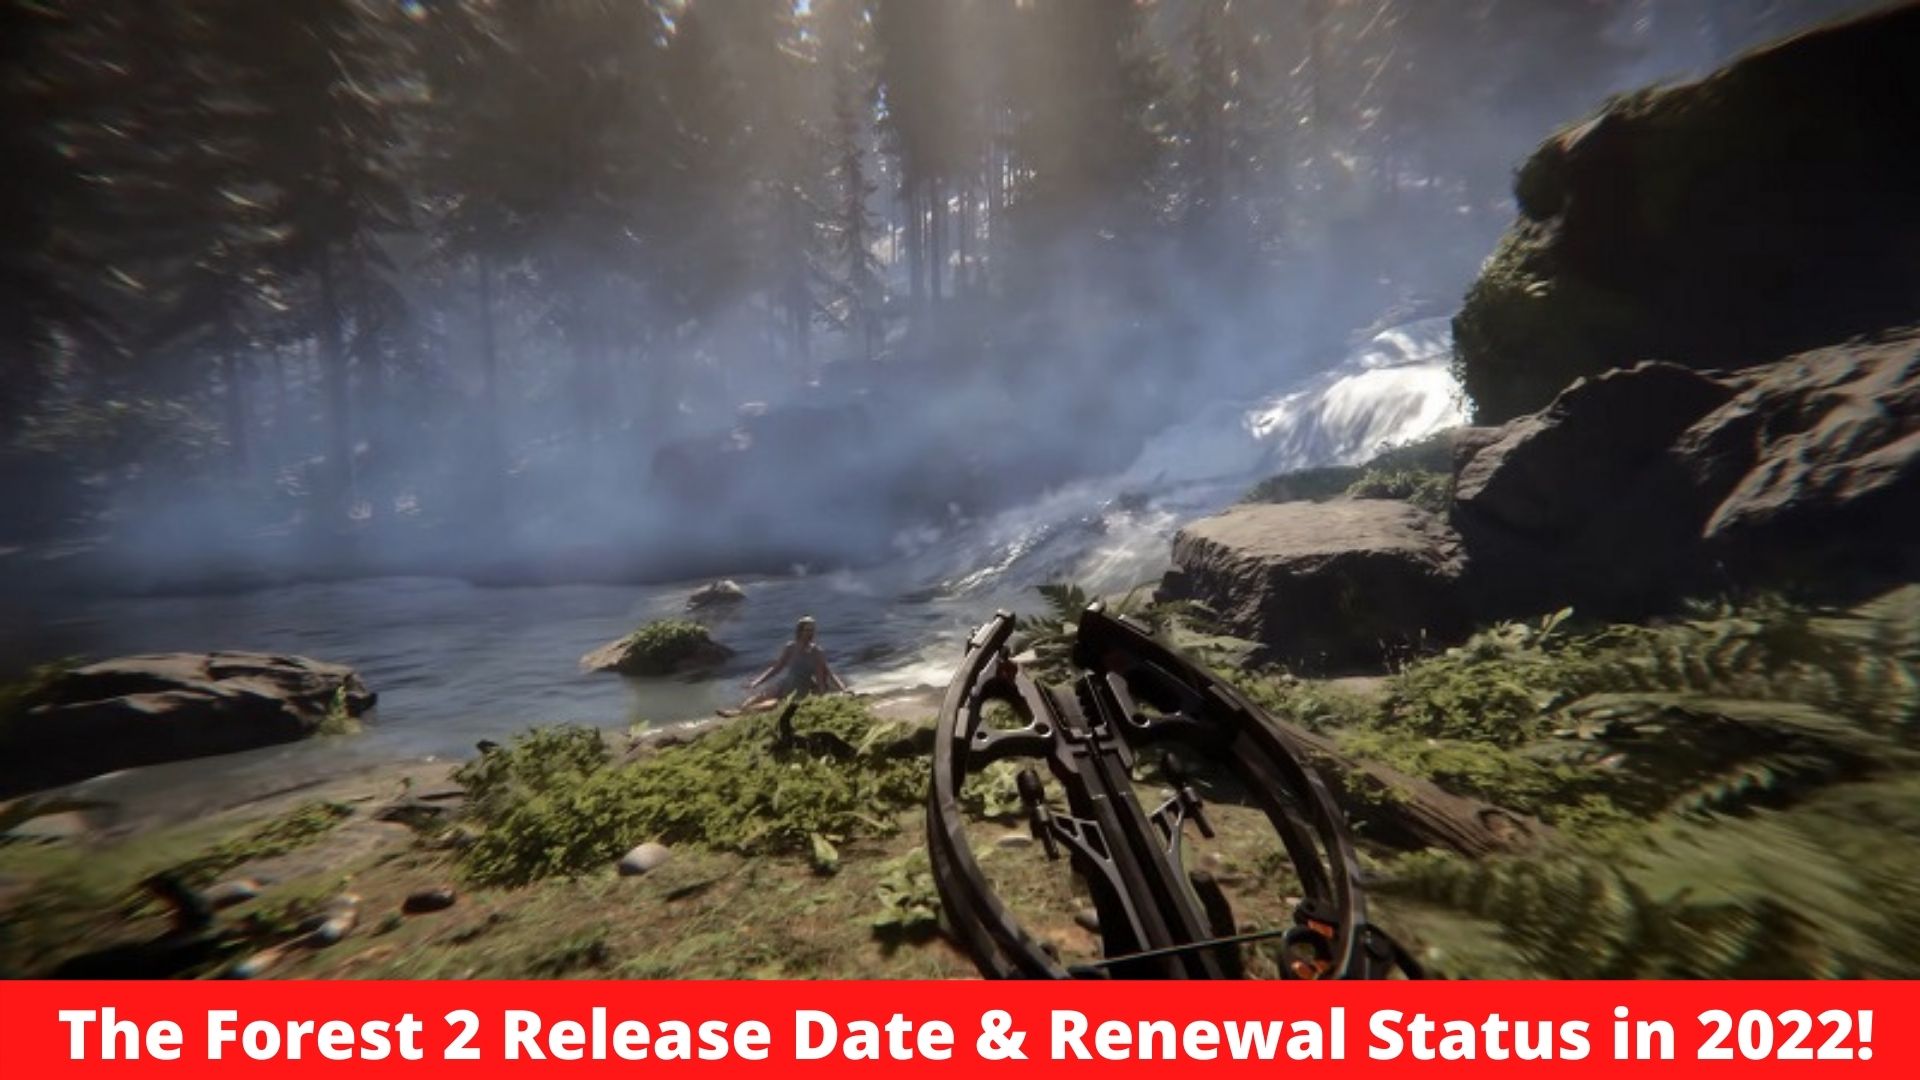 The Forest 2 Release Date & Renewal Status in 2022!